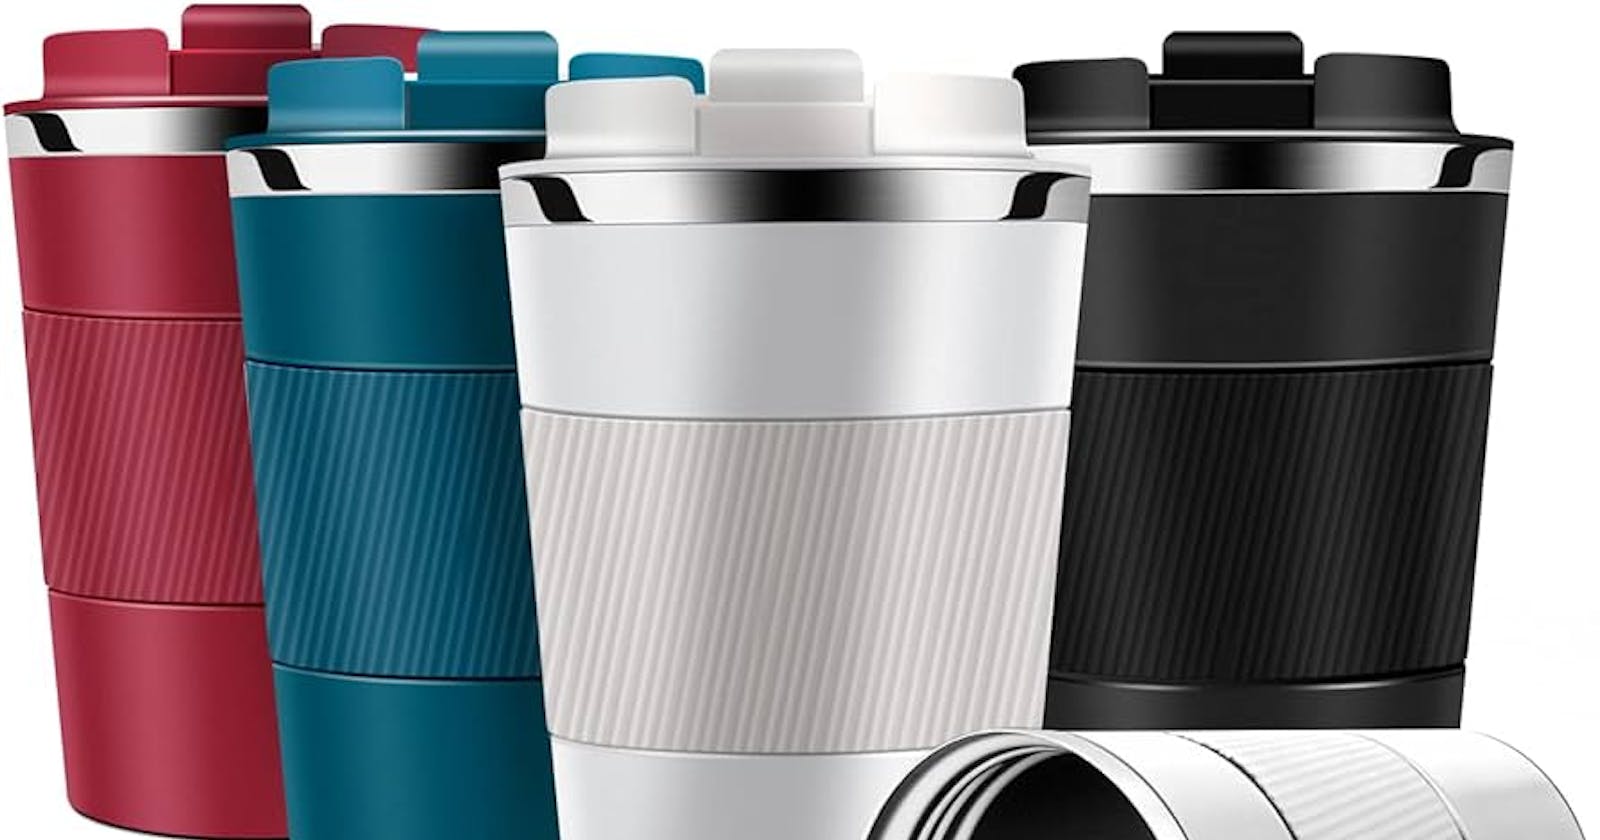 Travel Mug Market Research Report 2028, Industry Trends, Share, Size, Demand and Future Scope